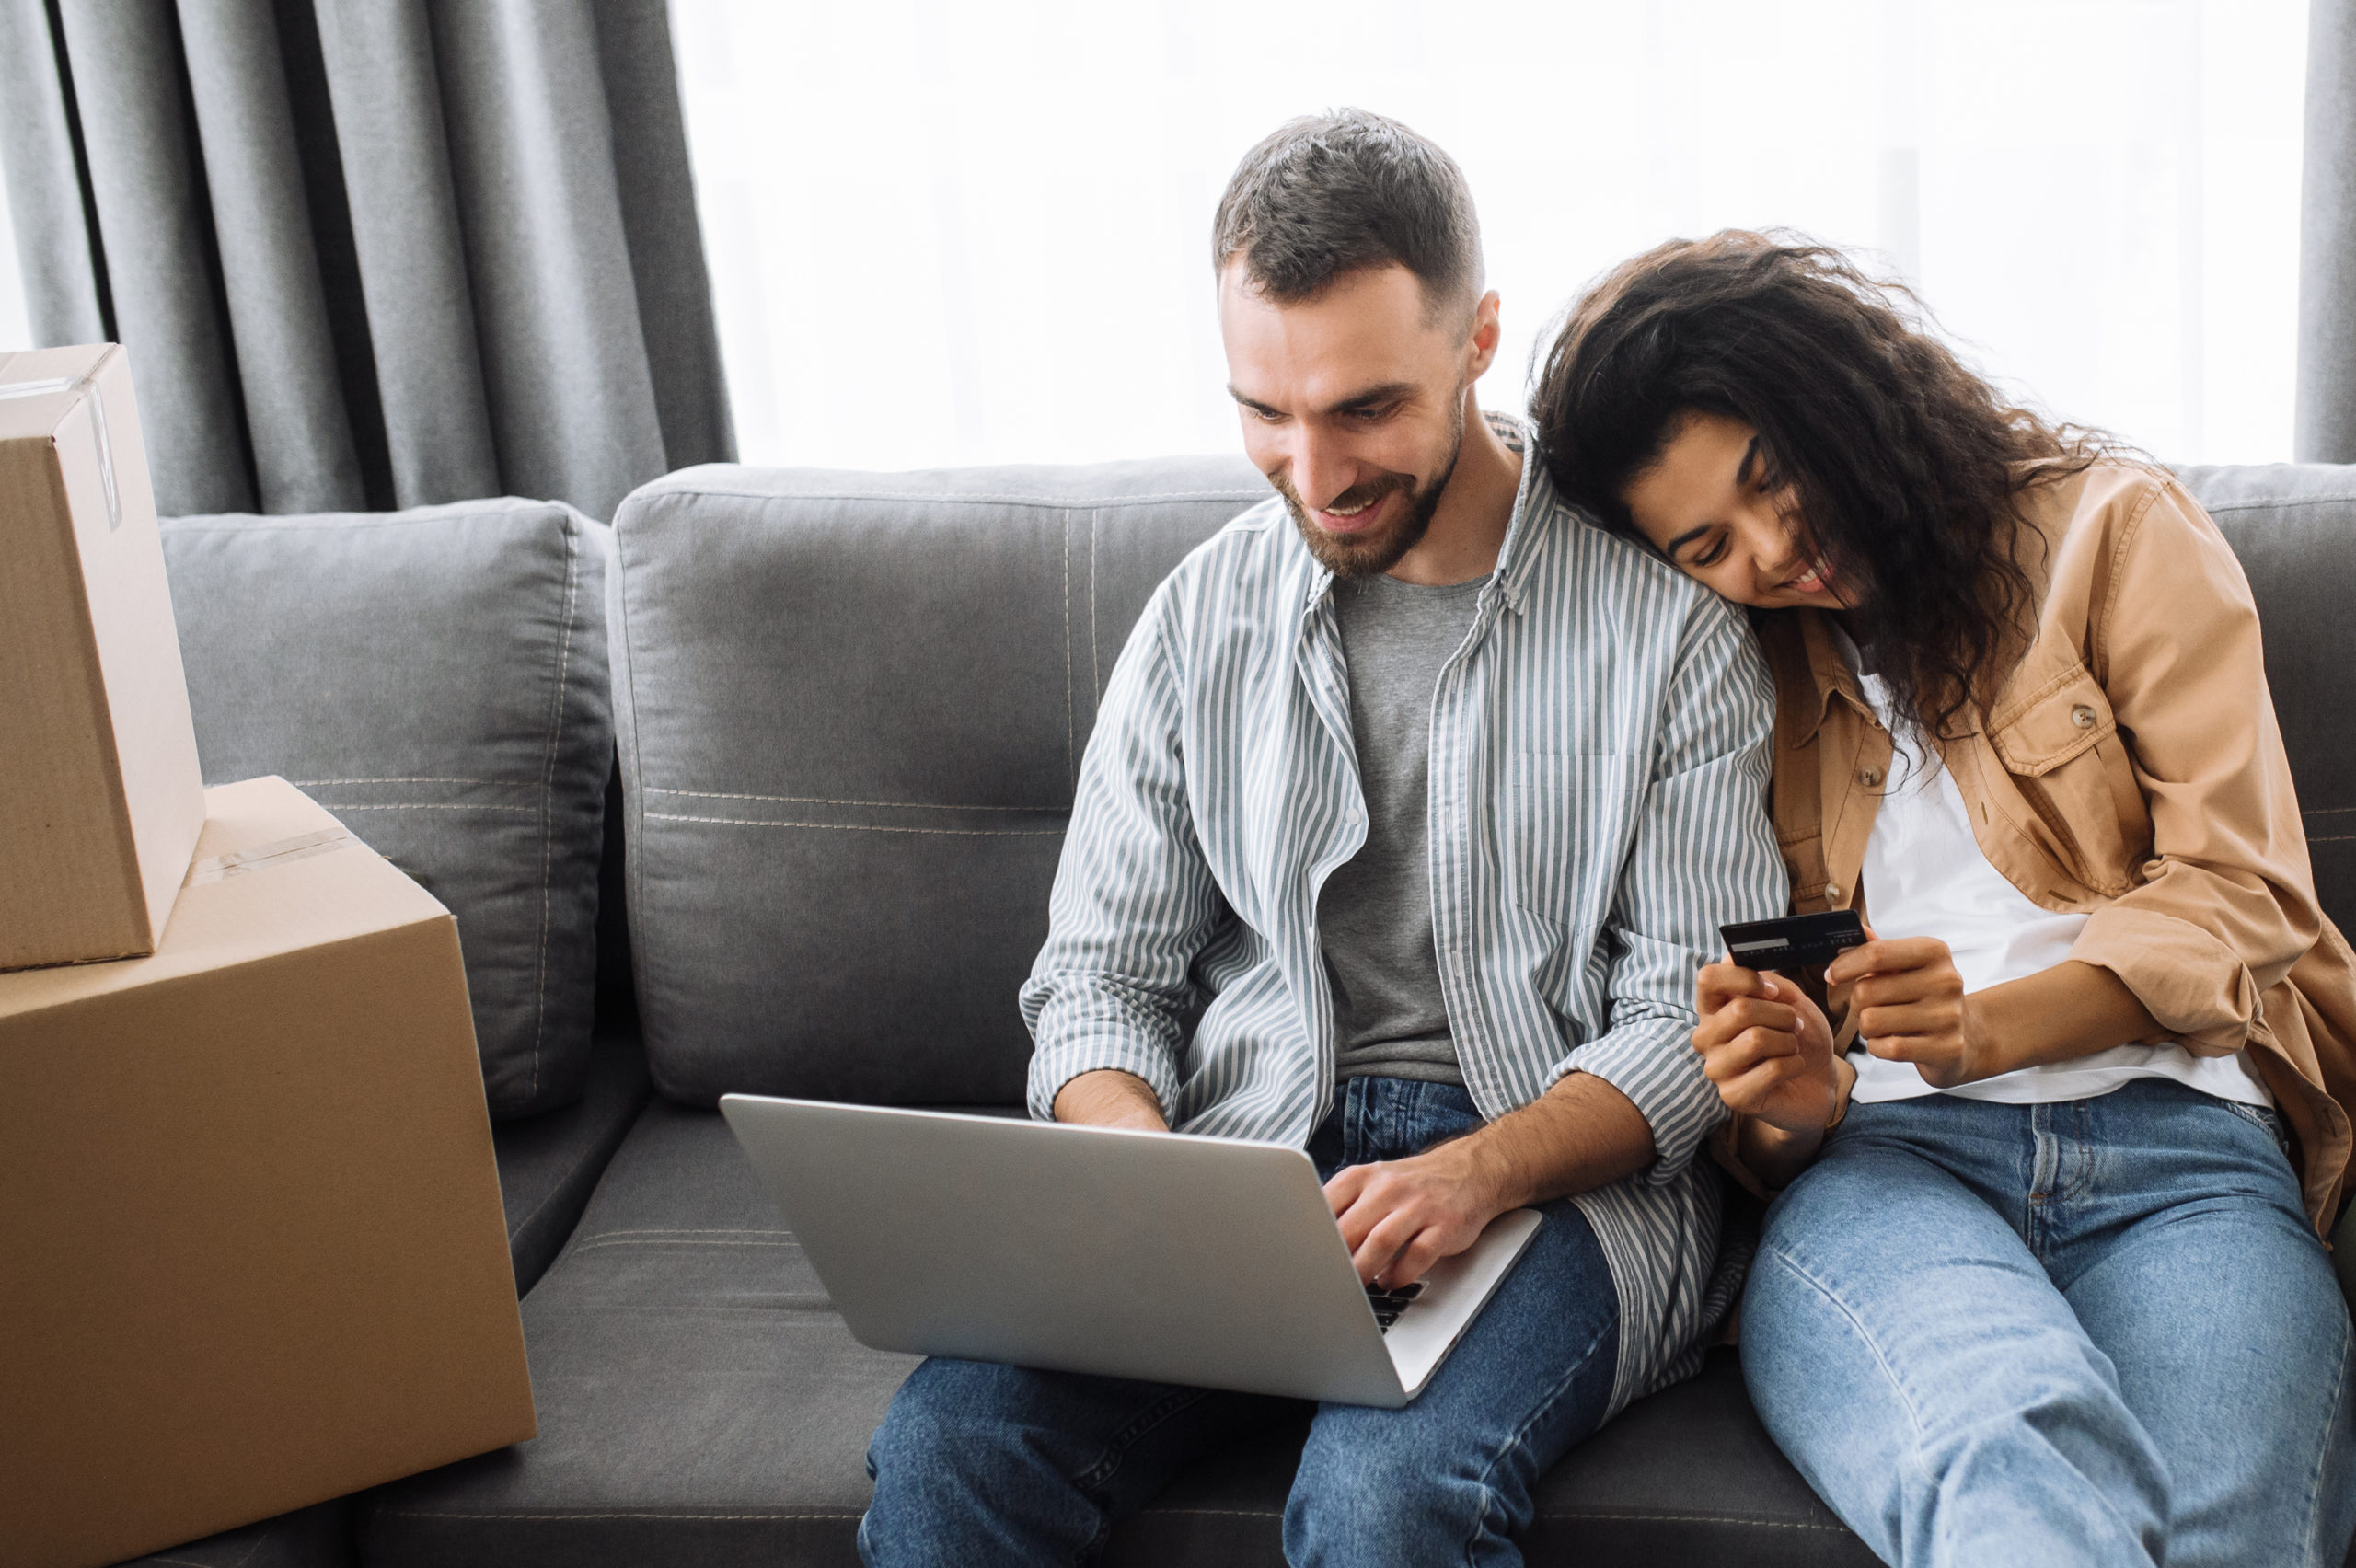 Couple sitting on the couch while the woman is holding a card and her husband is using a laptop